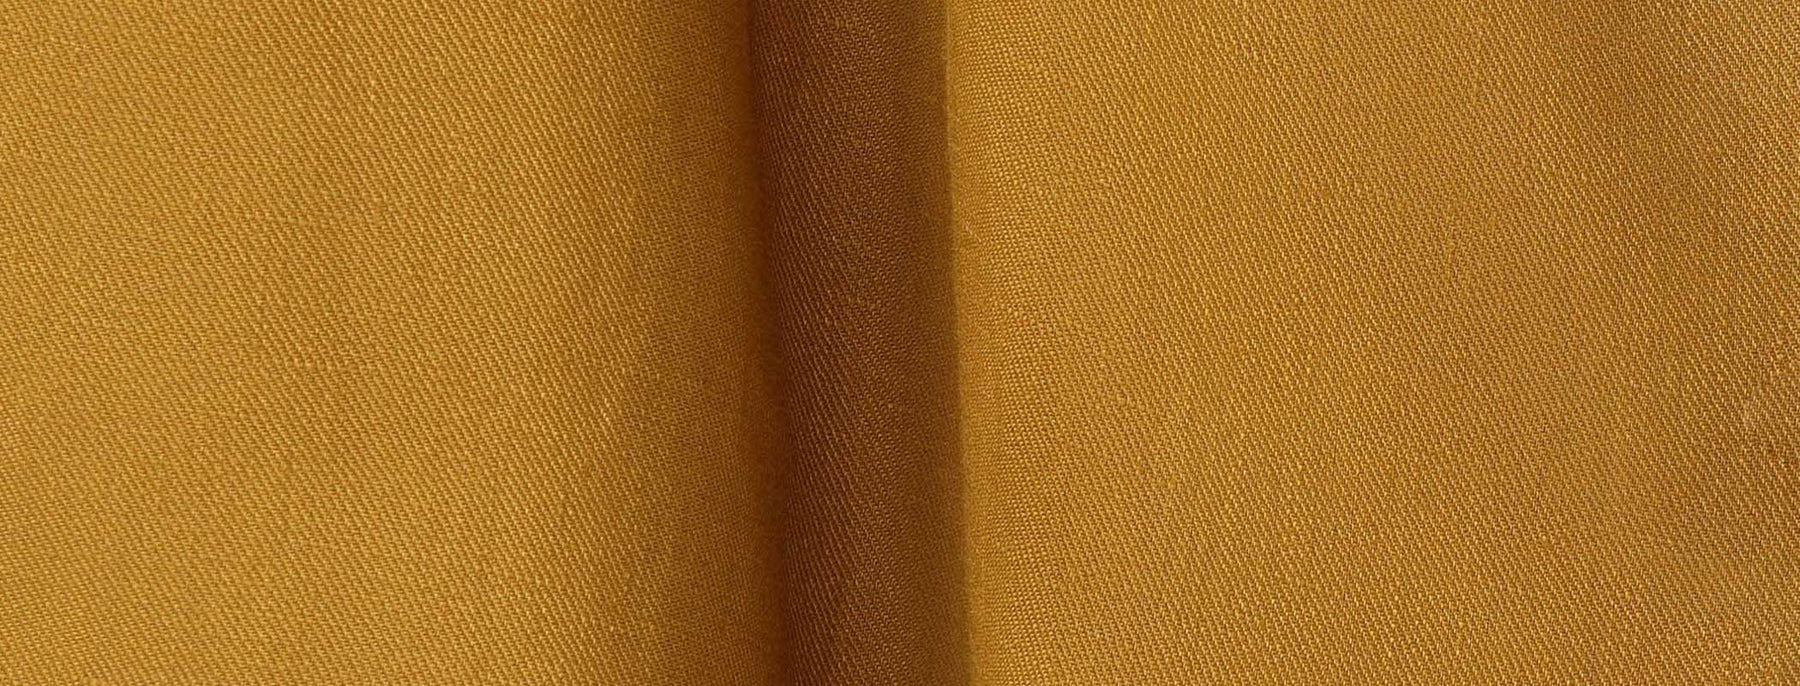 Fabric swatch of Australian and New Zealand women's clothing brand, Leina & Fleur's eco-conscious linen in natural antelope colourway, used to make a range of tailored linen jackets, wide leg pants and shorts for women.